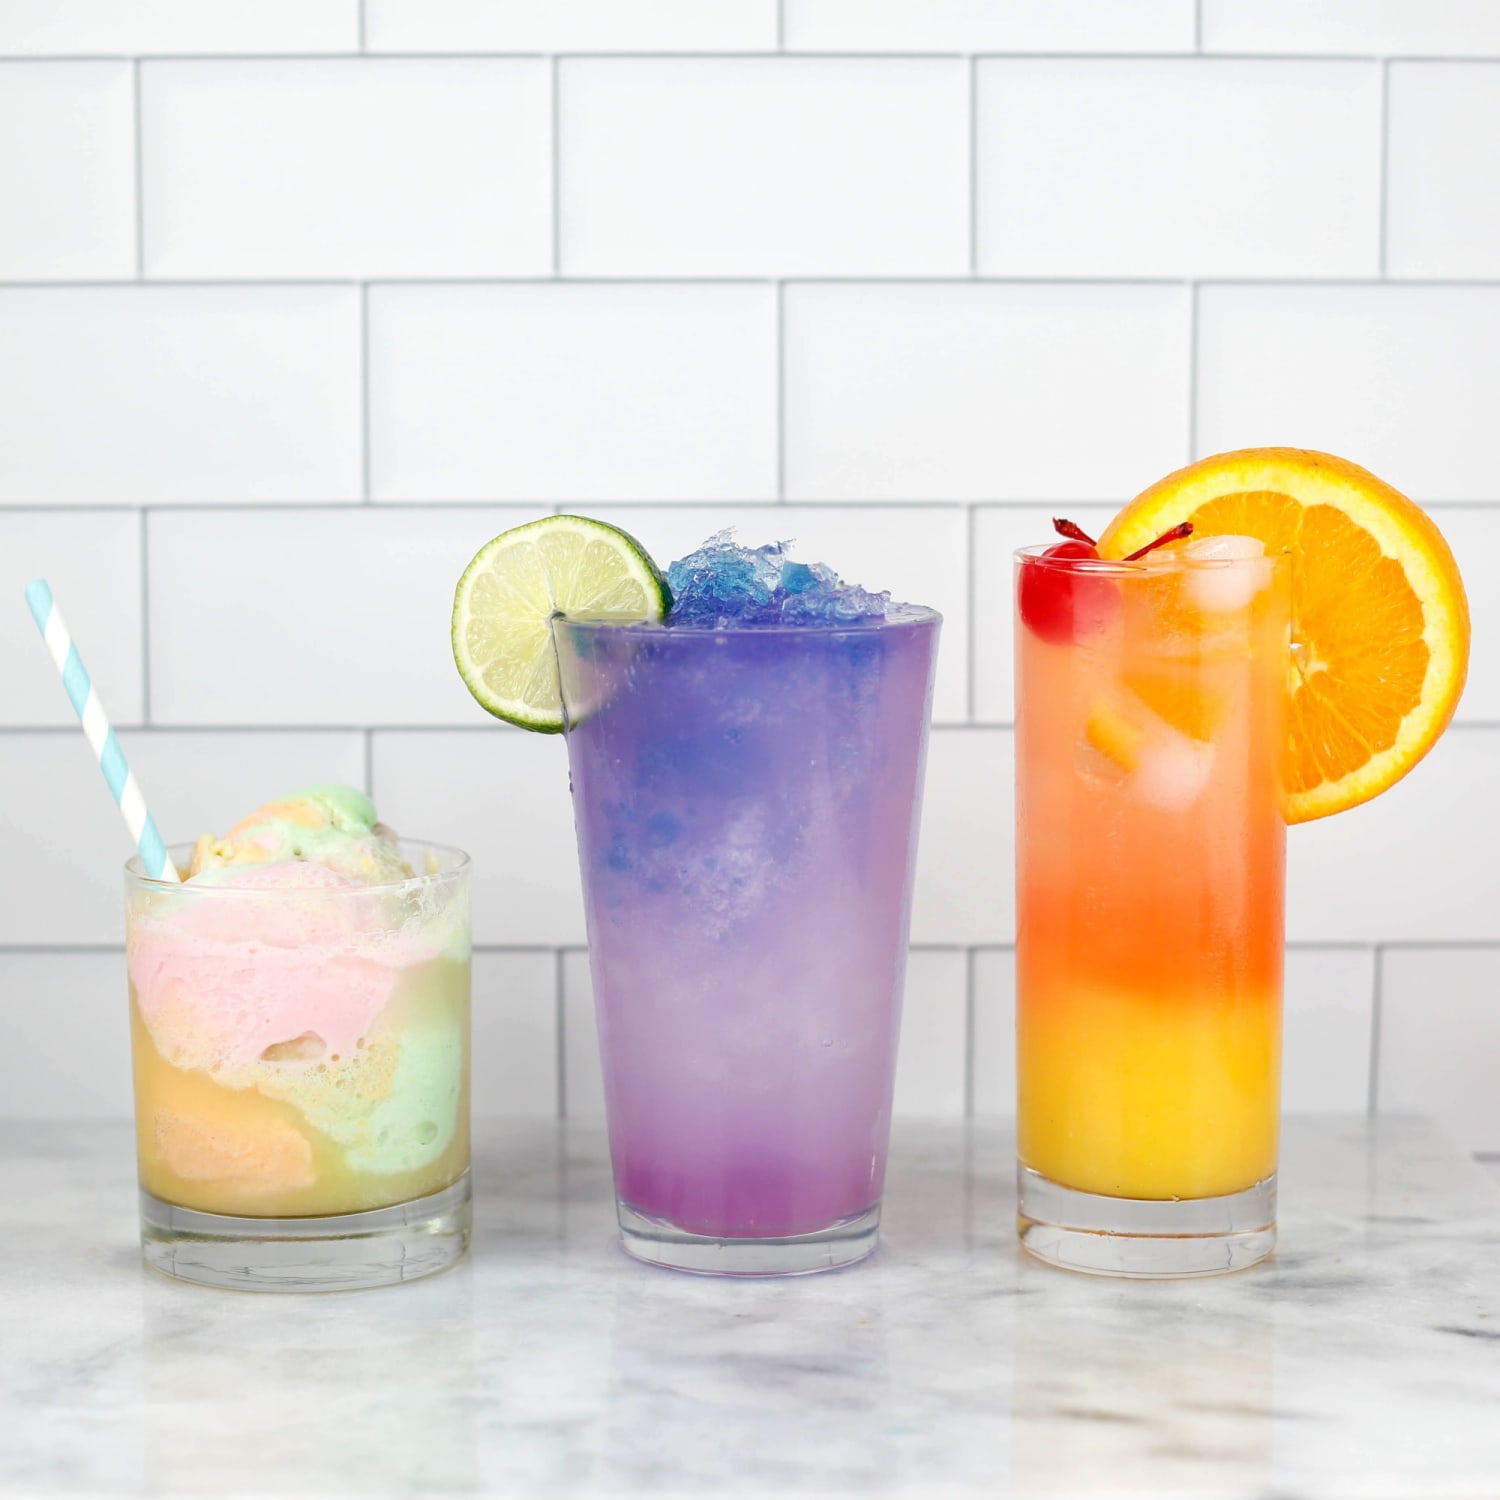 Colorful mocktails make for a picture-perfect summer sip